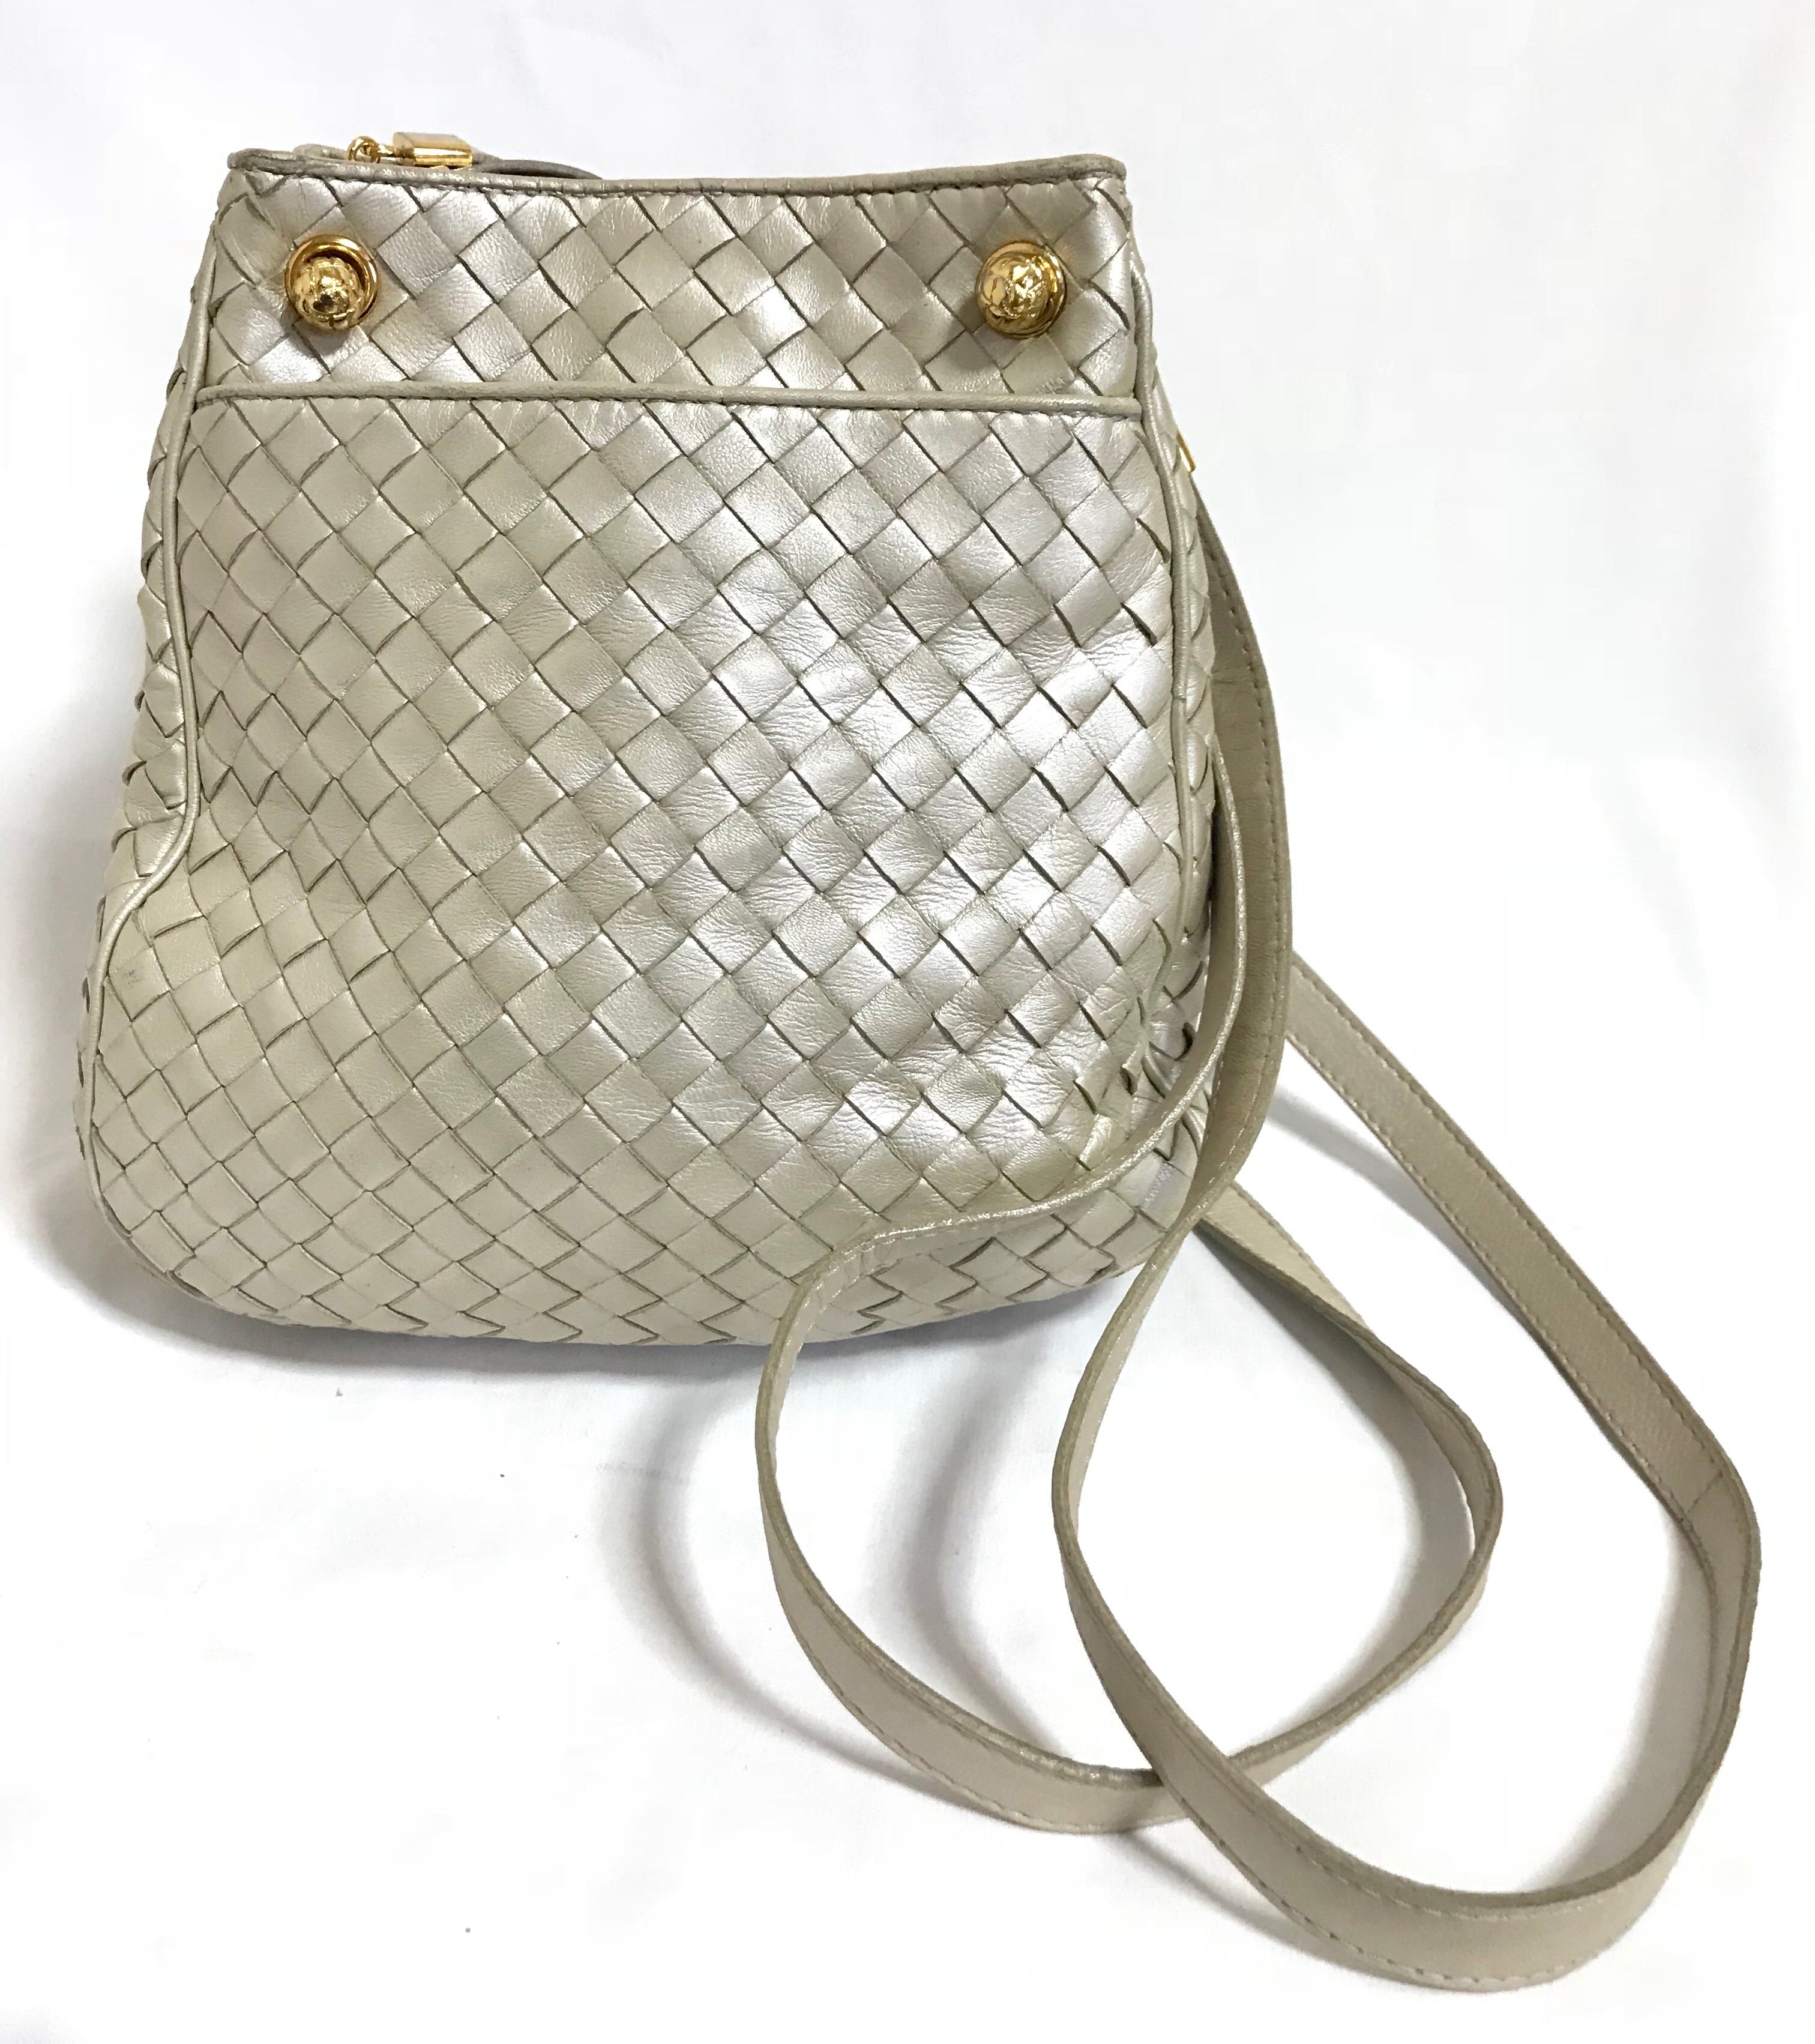 Authentic Vintage Coach Leather Shoulder Bag w/ Woven Strap in White